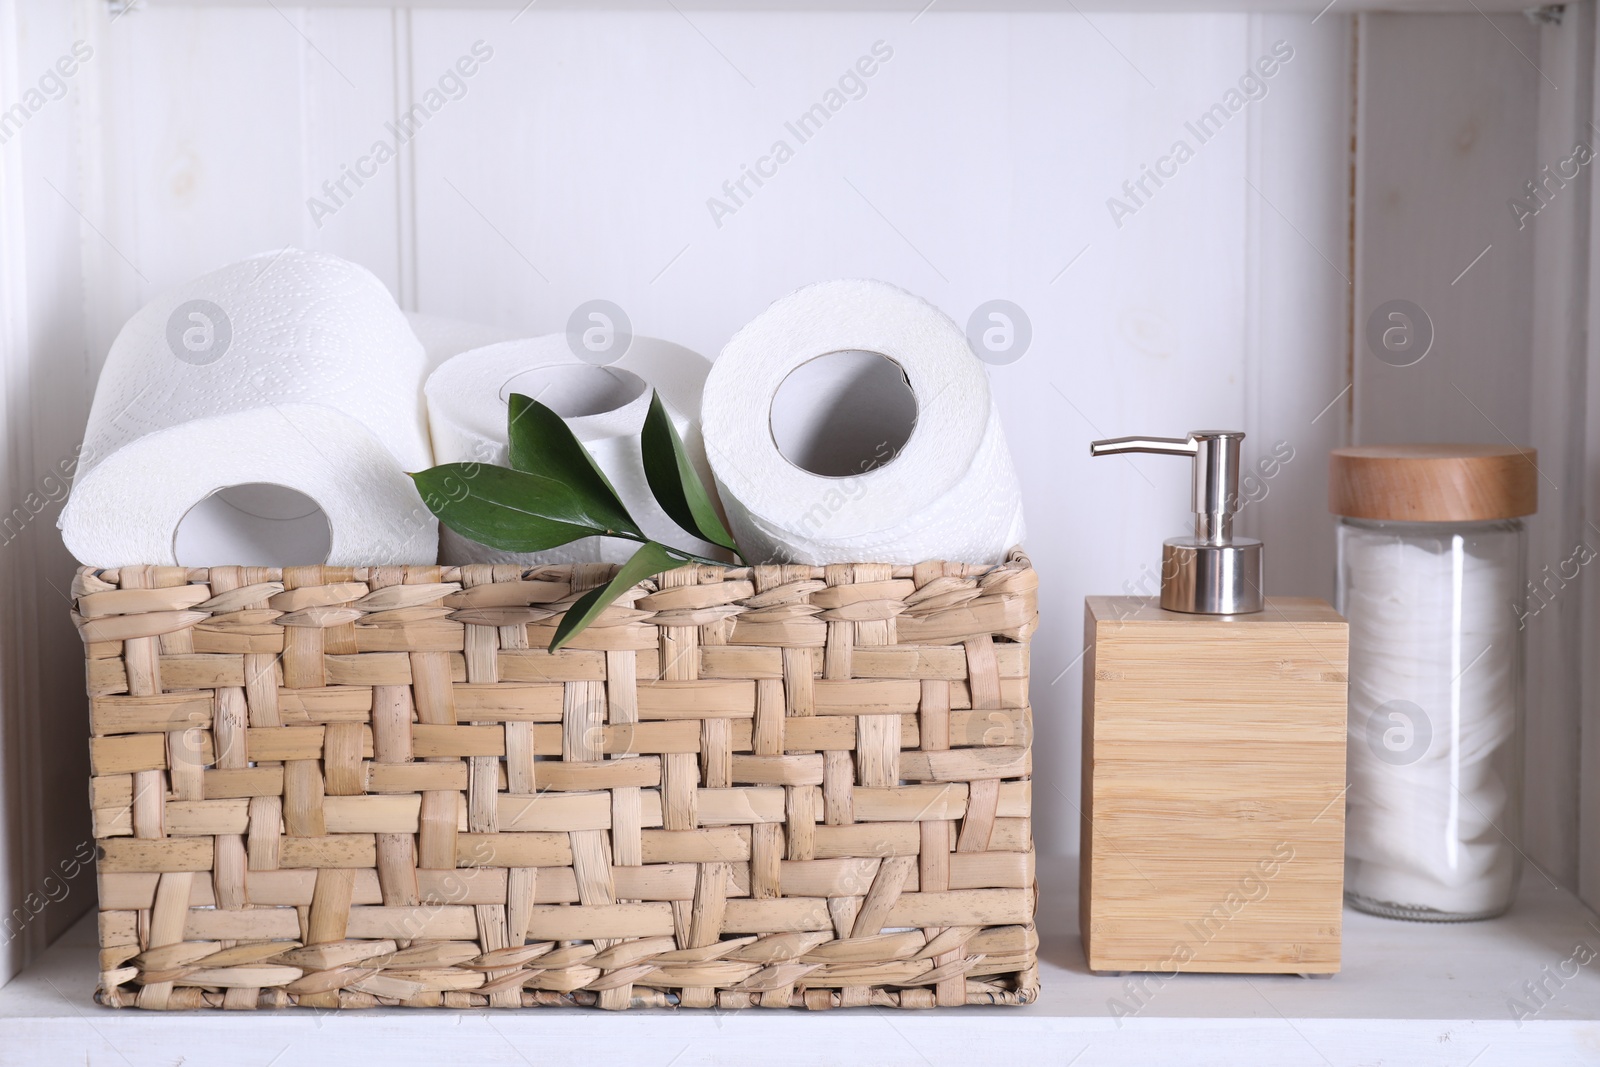 Photo of Toilet paper rolls in wicker basket, green leaves, cotton pads and dispenser on white shelf